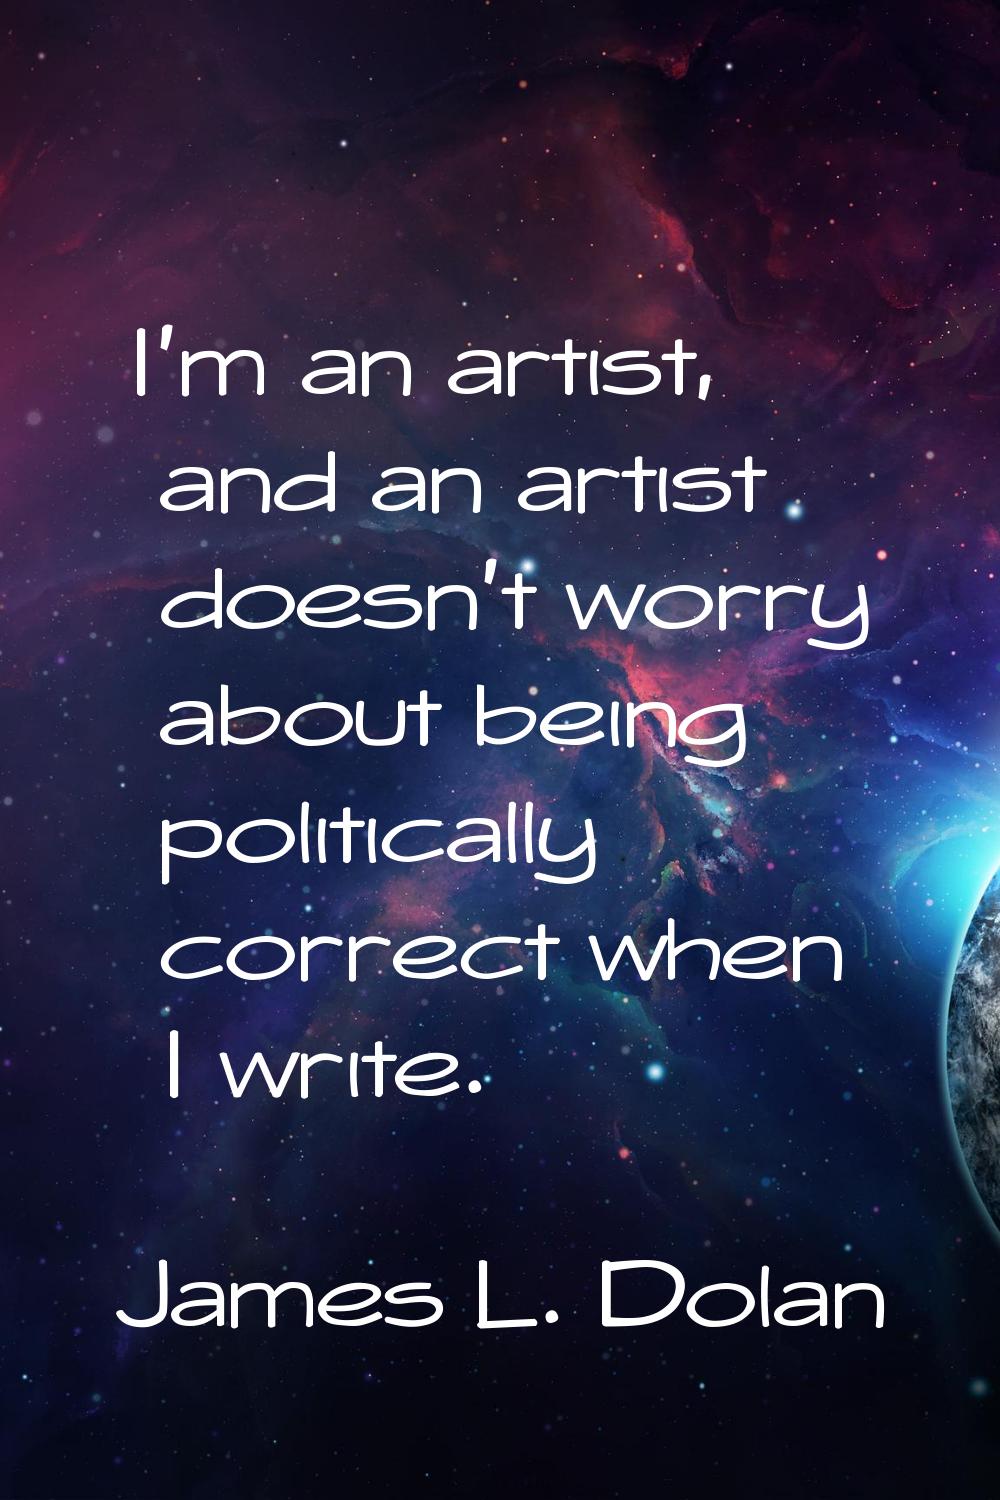 I'm an artist, and an artist doesn't worry about being politically correct when I write.